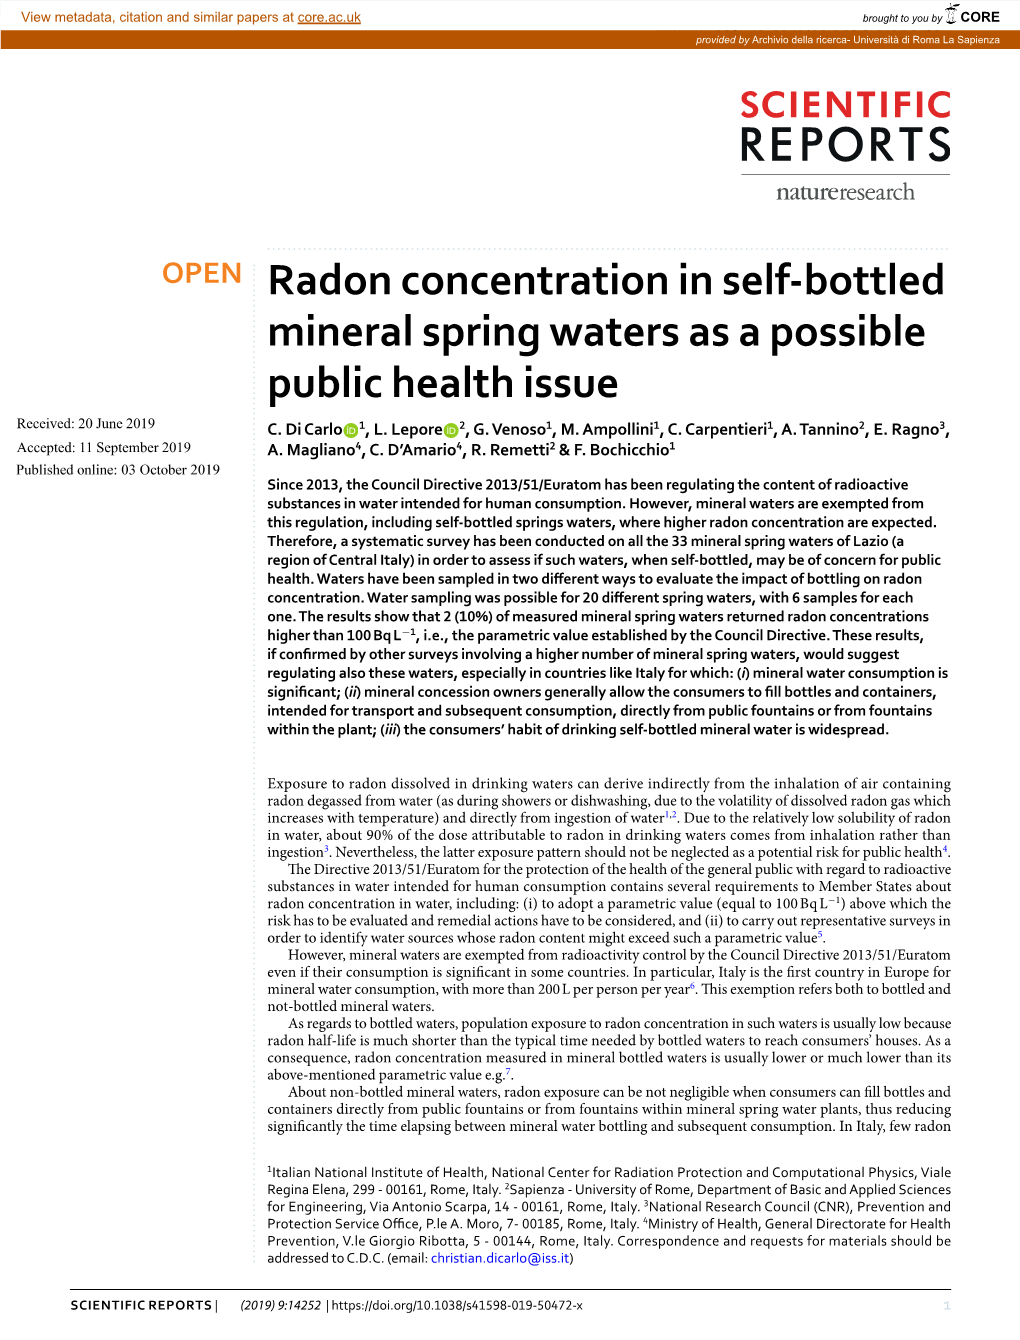 Radon Concentration in Self-Bottled Mineral Spring Waters As a Possible Public Health Issue Received: 20 June 2019 C